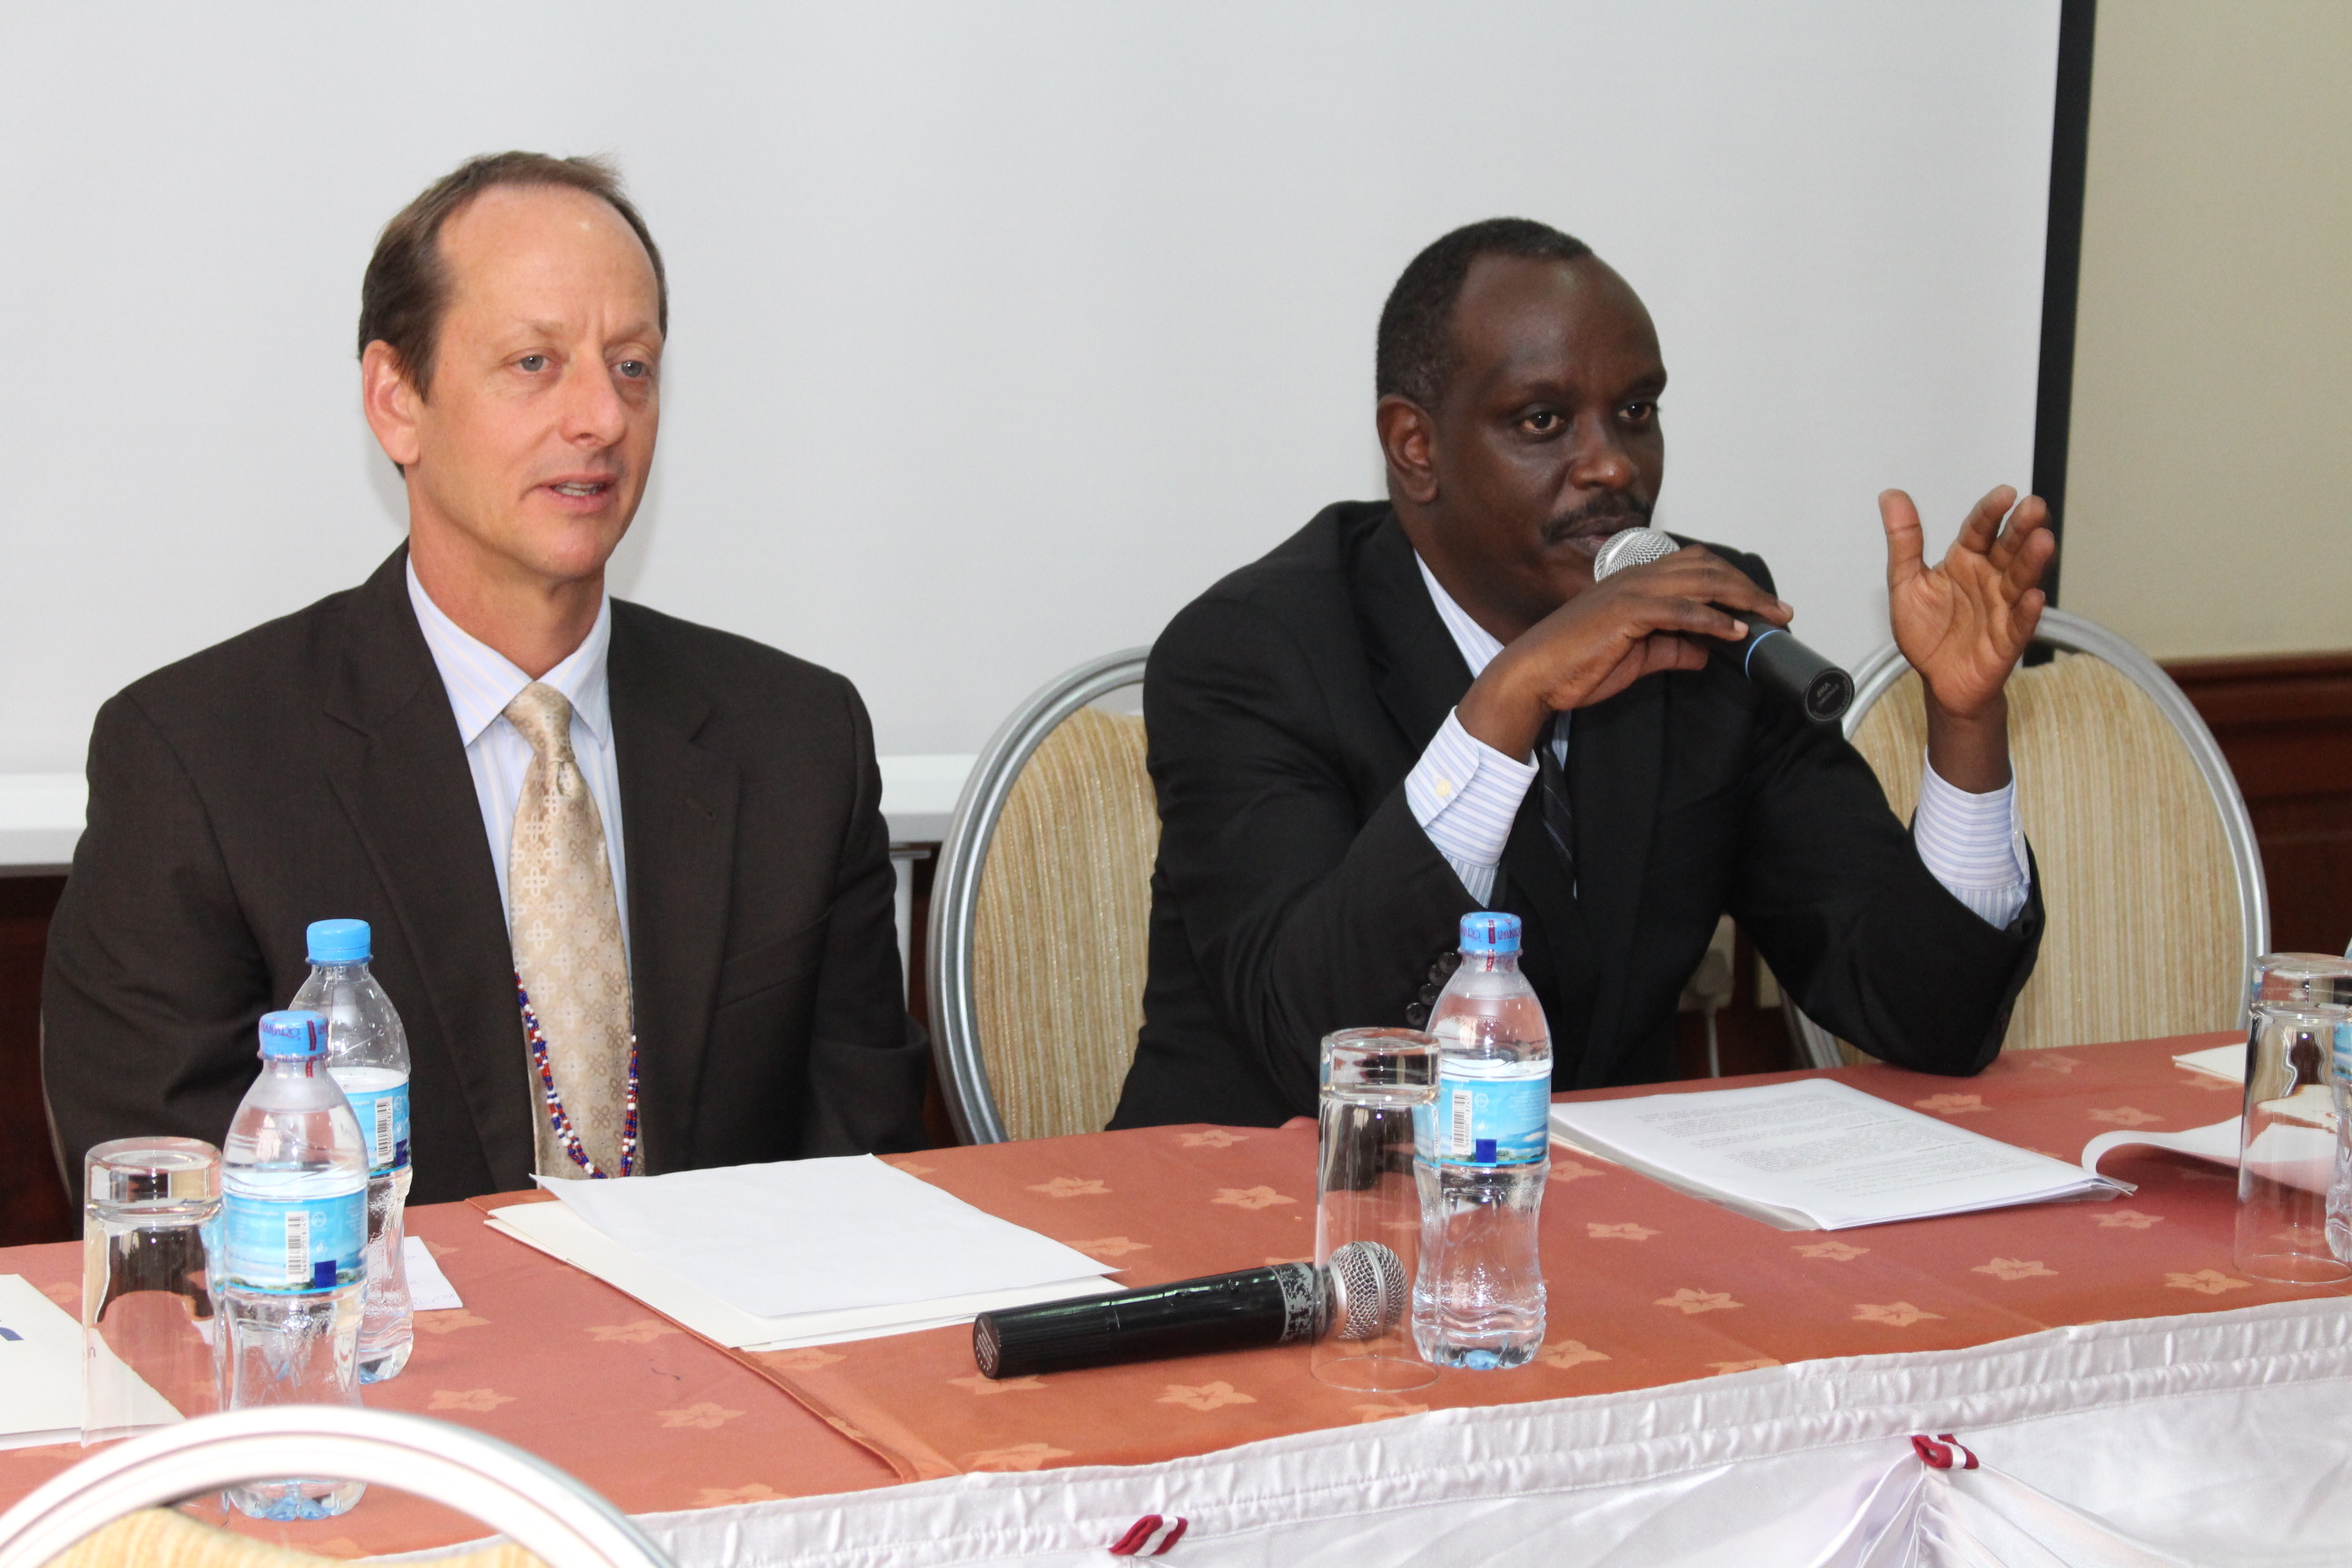 The EAC Secretary General, Amb. Dr. Richard Sezibera make his remarks during the official opening session as Mr. Matthew Rees, USAID/Kenya and East Africa/Regional Economic Integration Office Director looks on